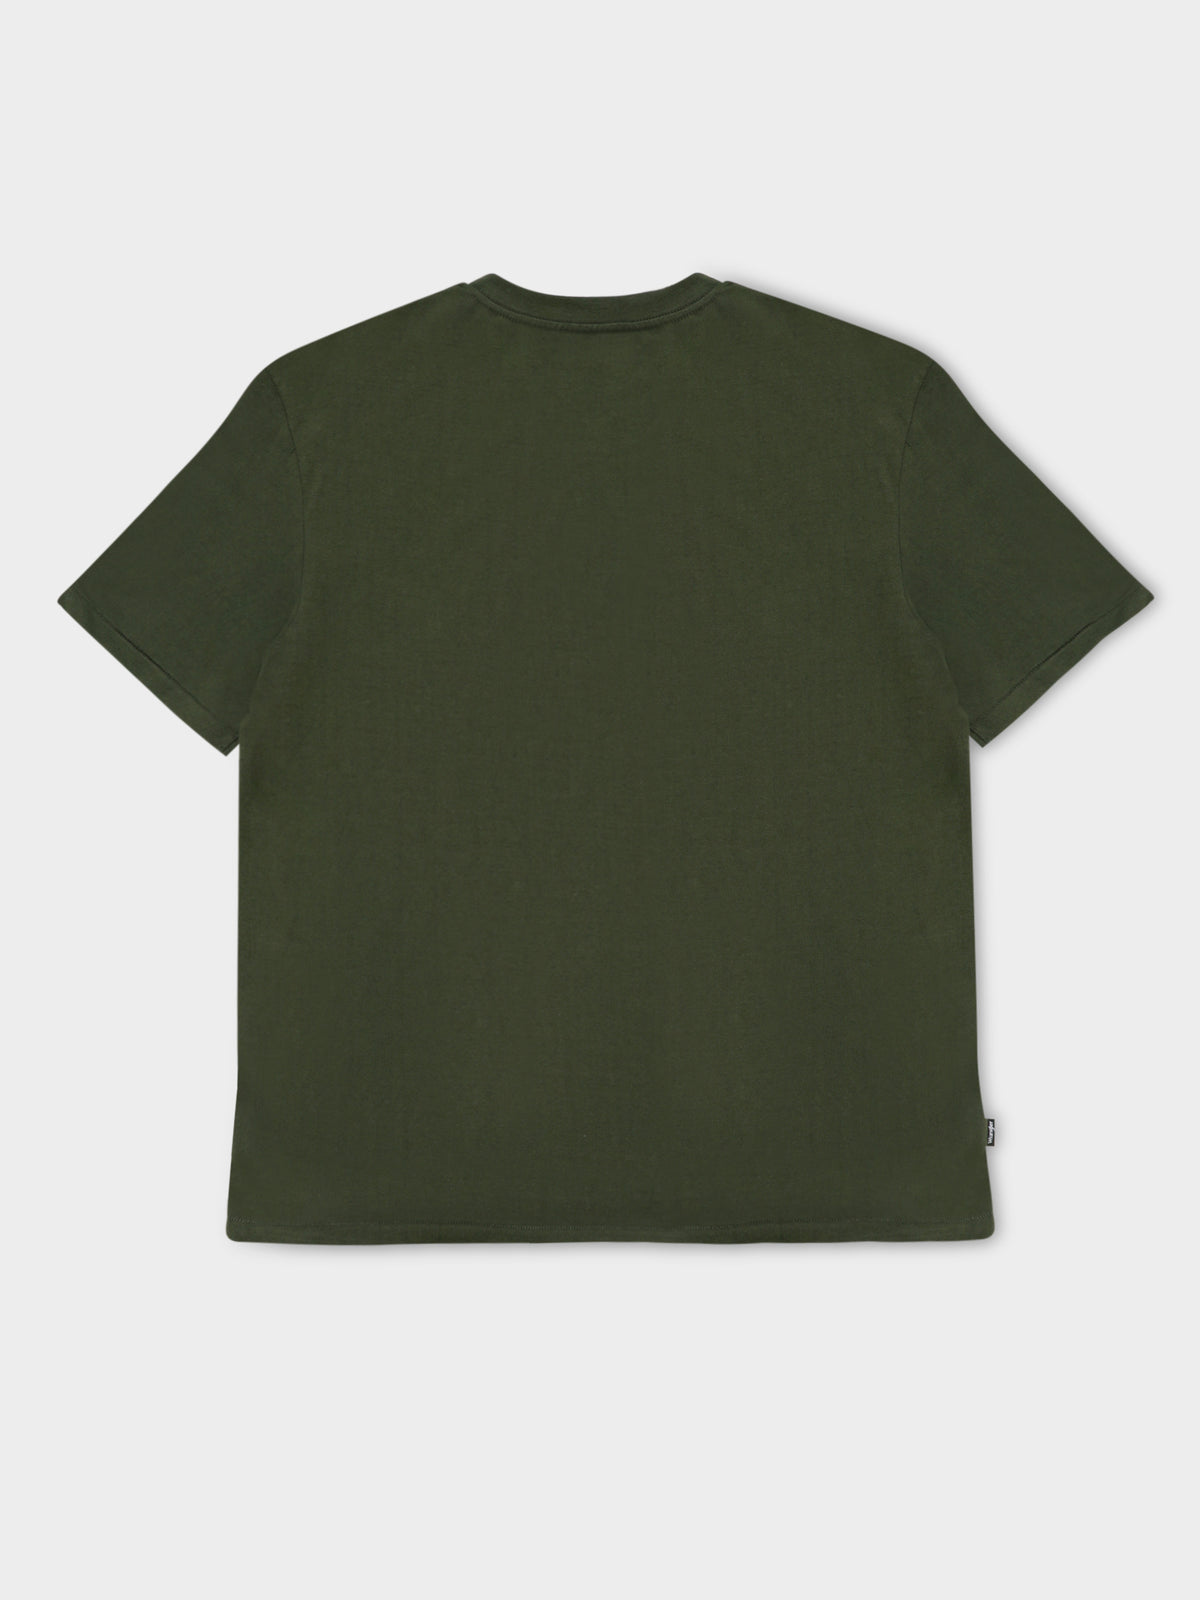 Wrangler Baggy T-Shirt in Forest Green